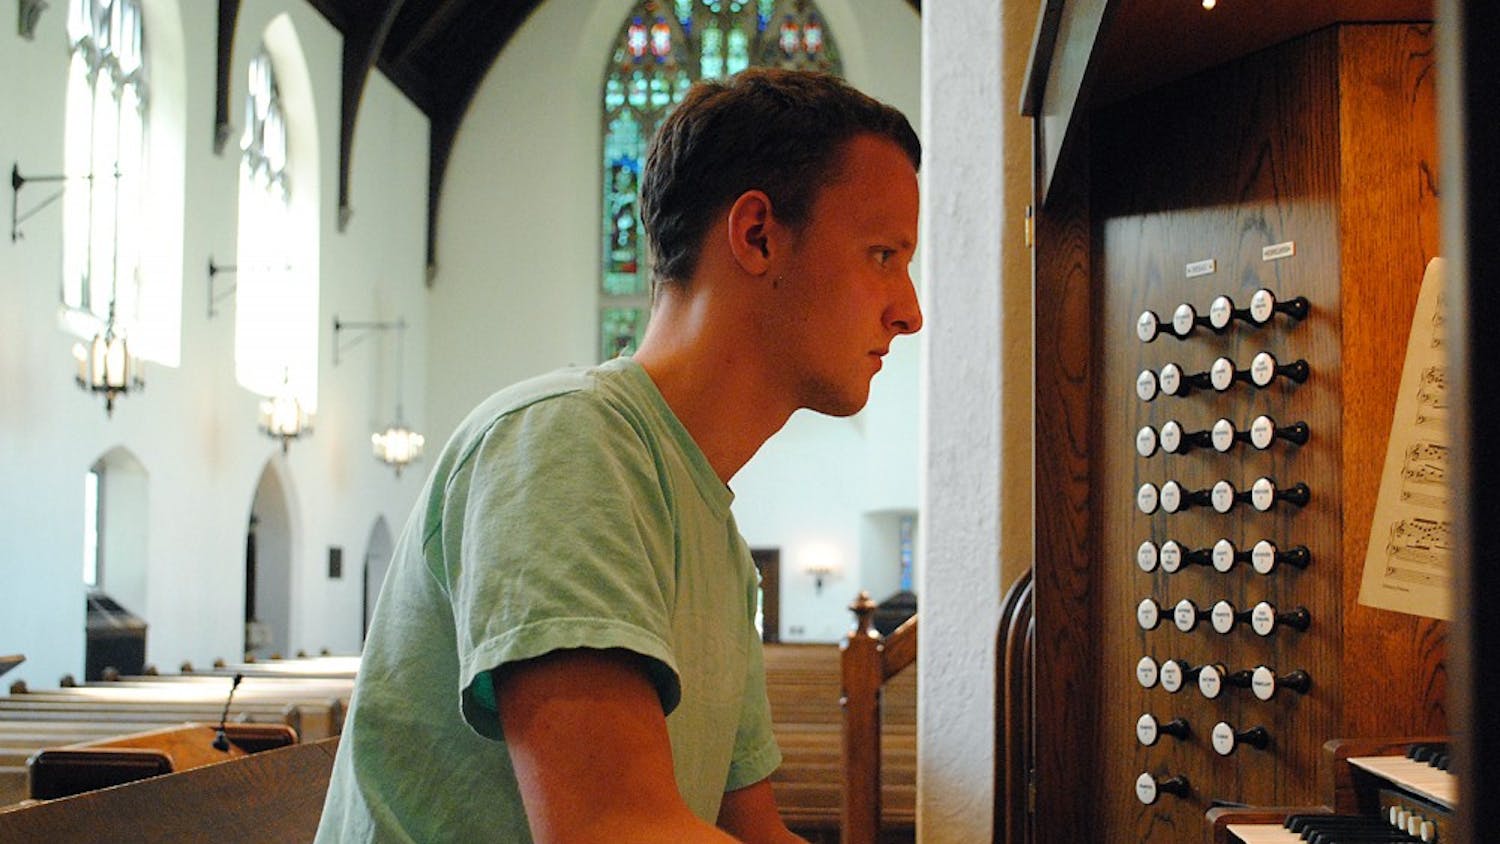 Senior Eric J. Surber practices playing the organ at Chapel of the Cross, where he has been performing at various services for three years. 